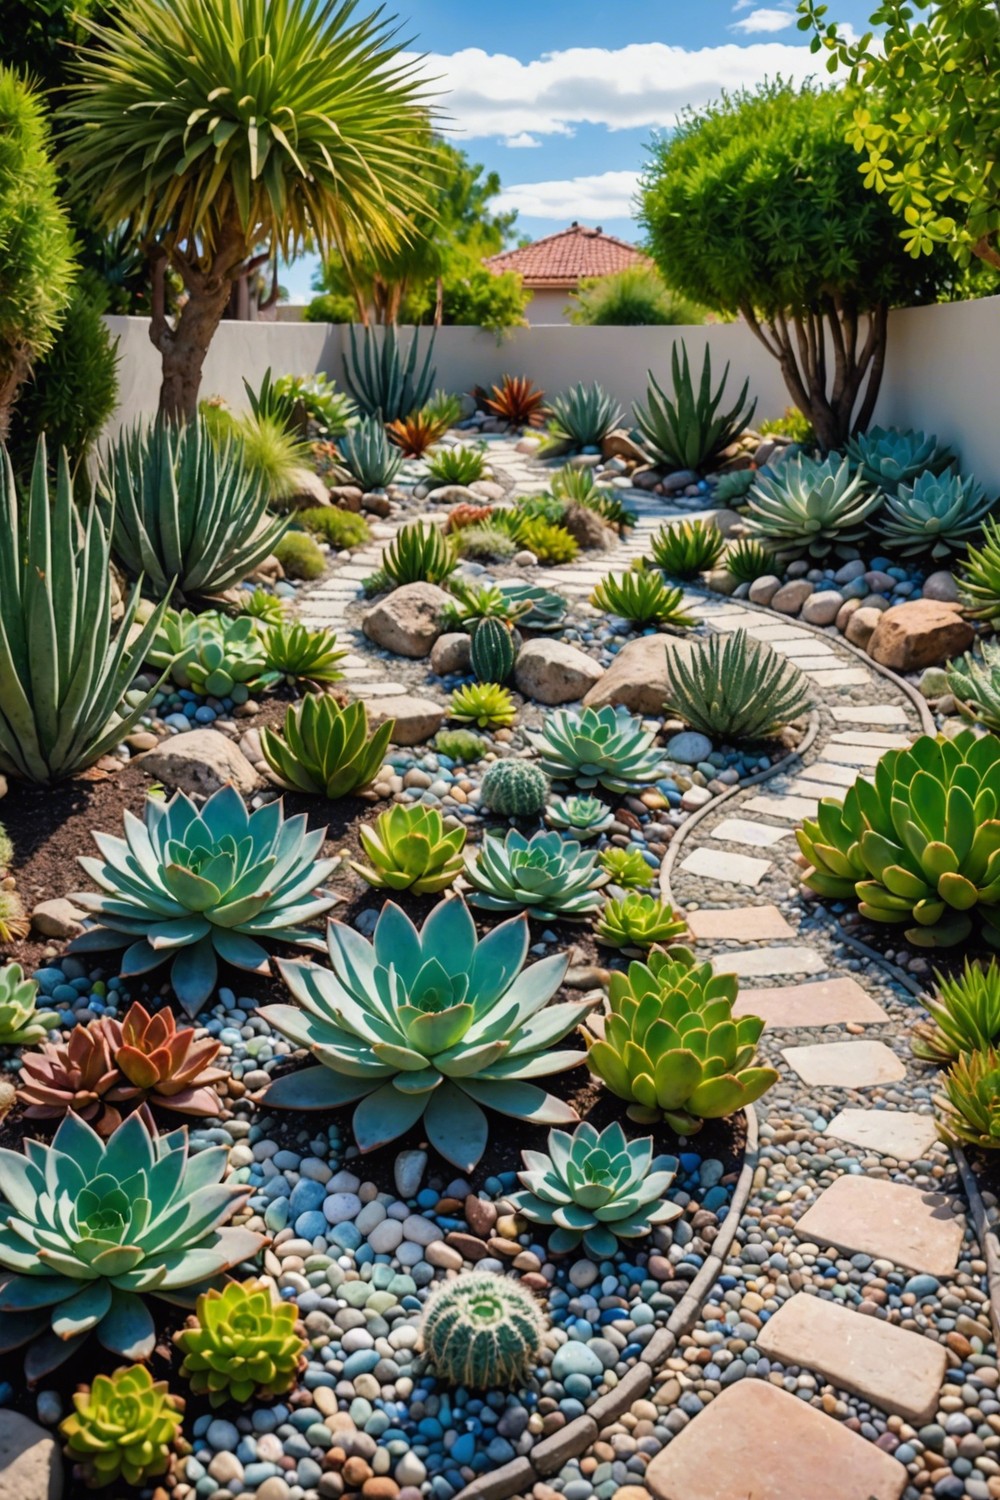 Whimsical Succulent Pathways for a Touch of Whimsy